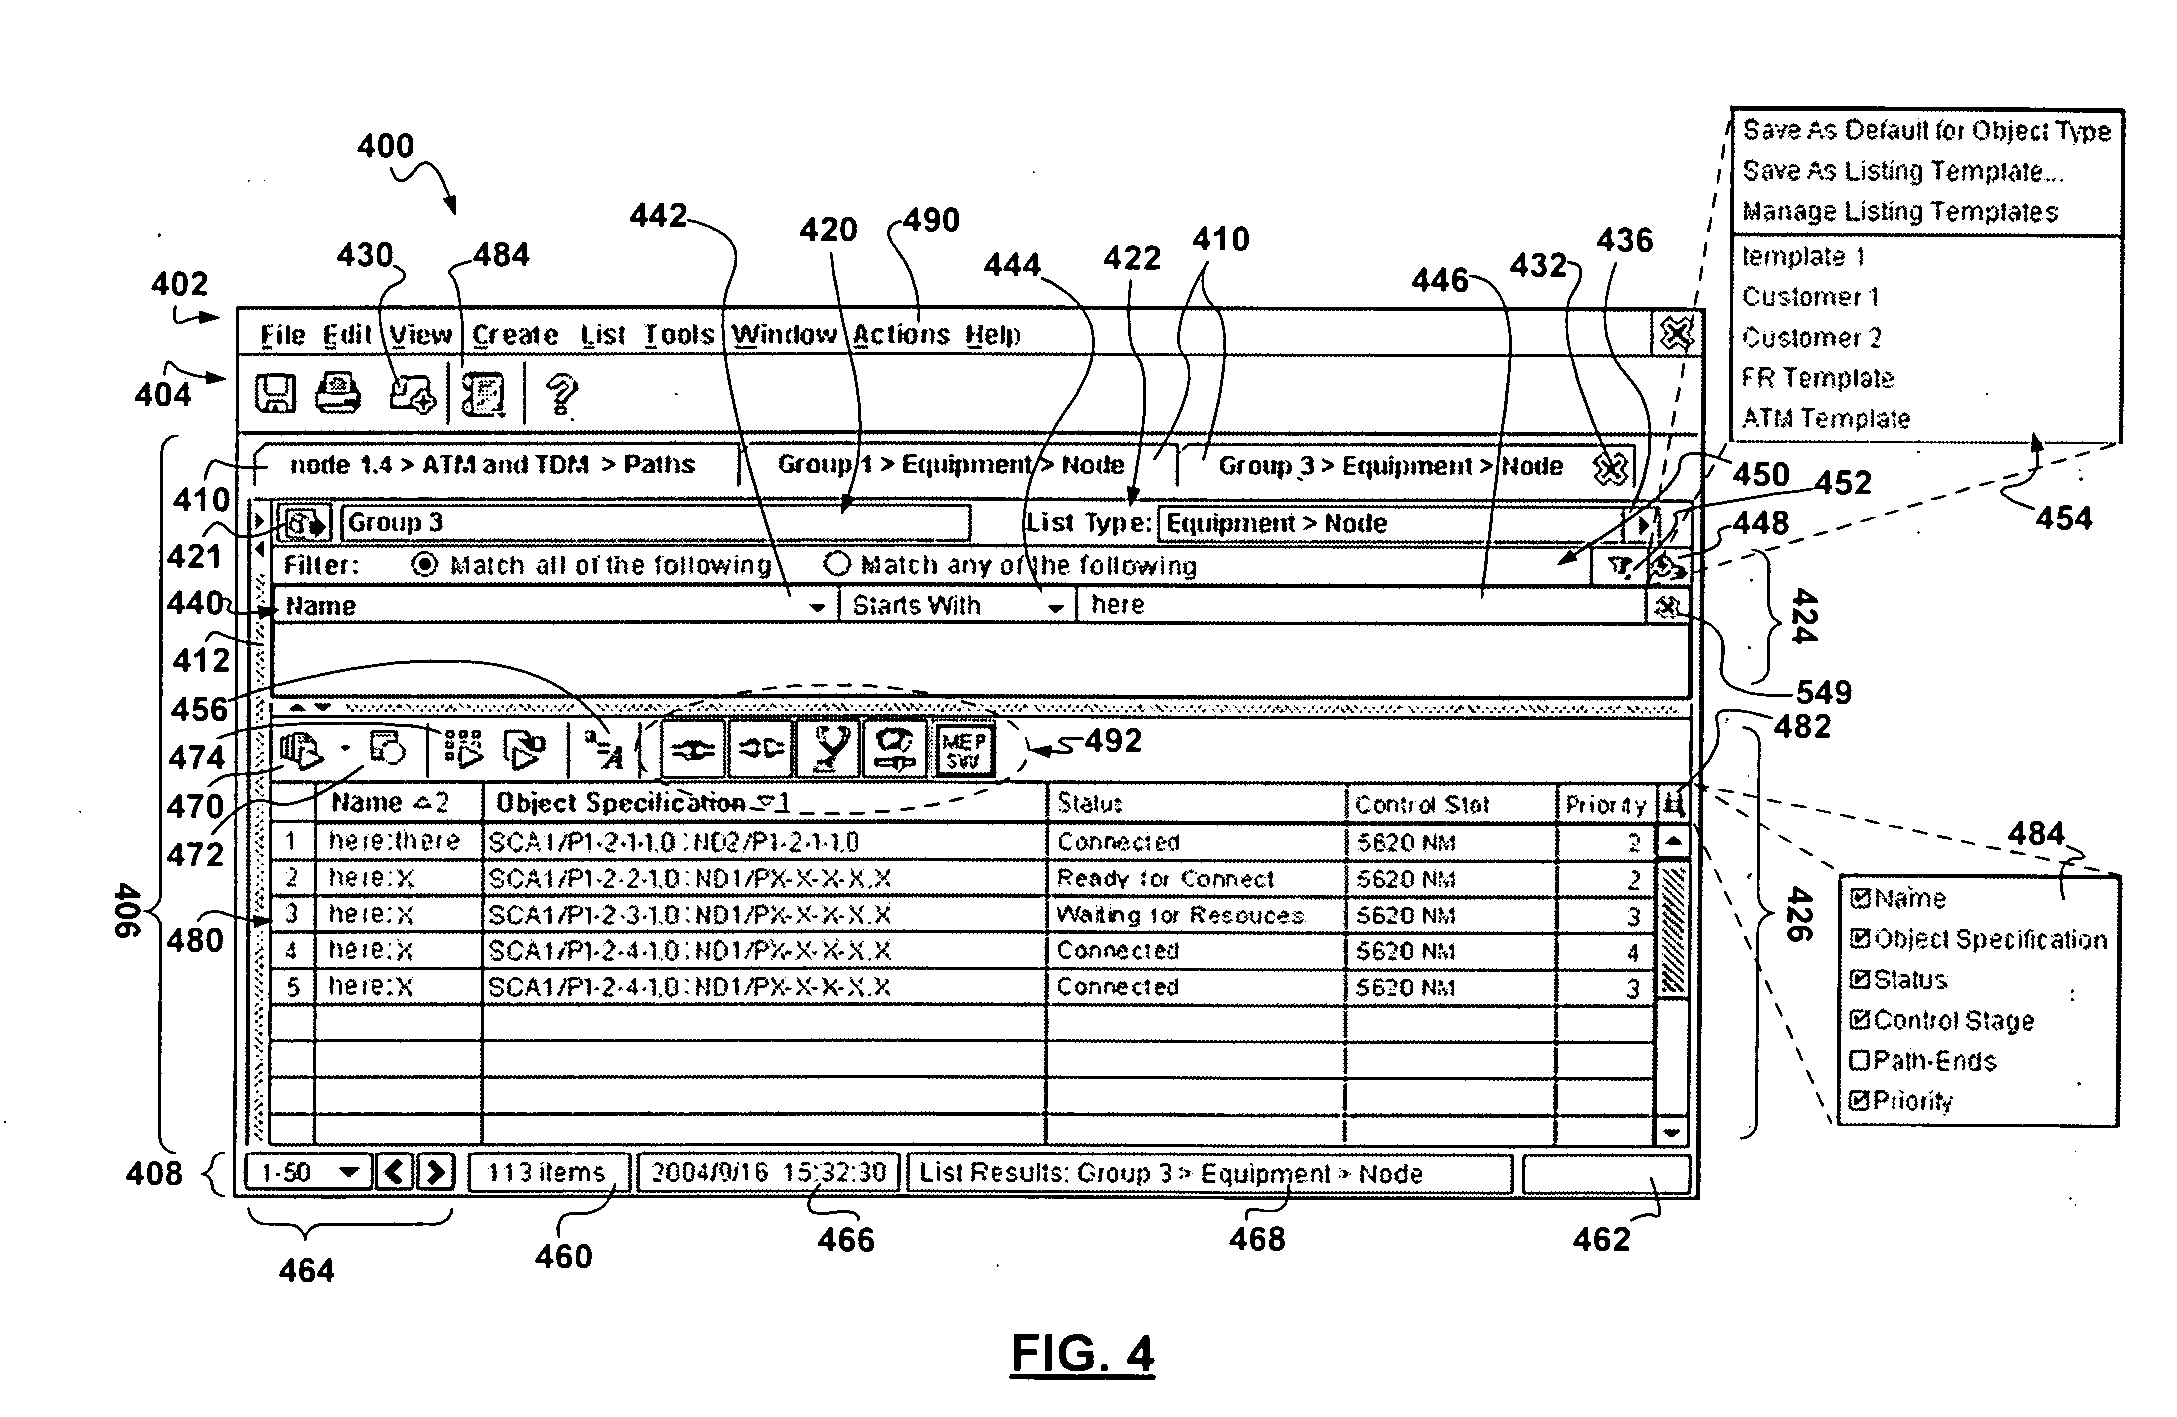 Graphical user interface for generic listing of managed objects